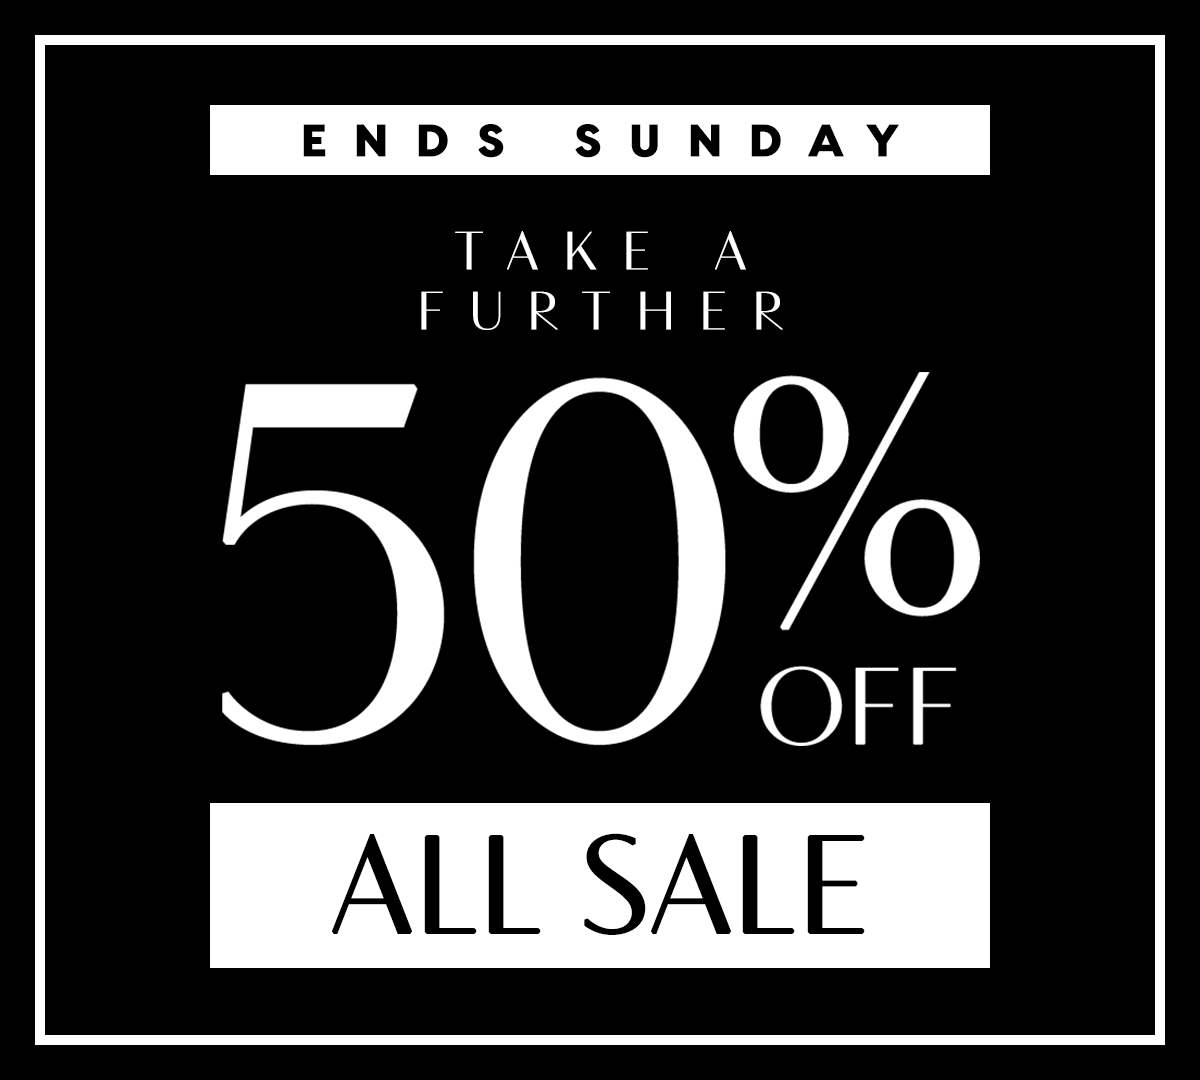 Ends Sunday. Take a further 50% off sale